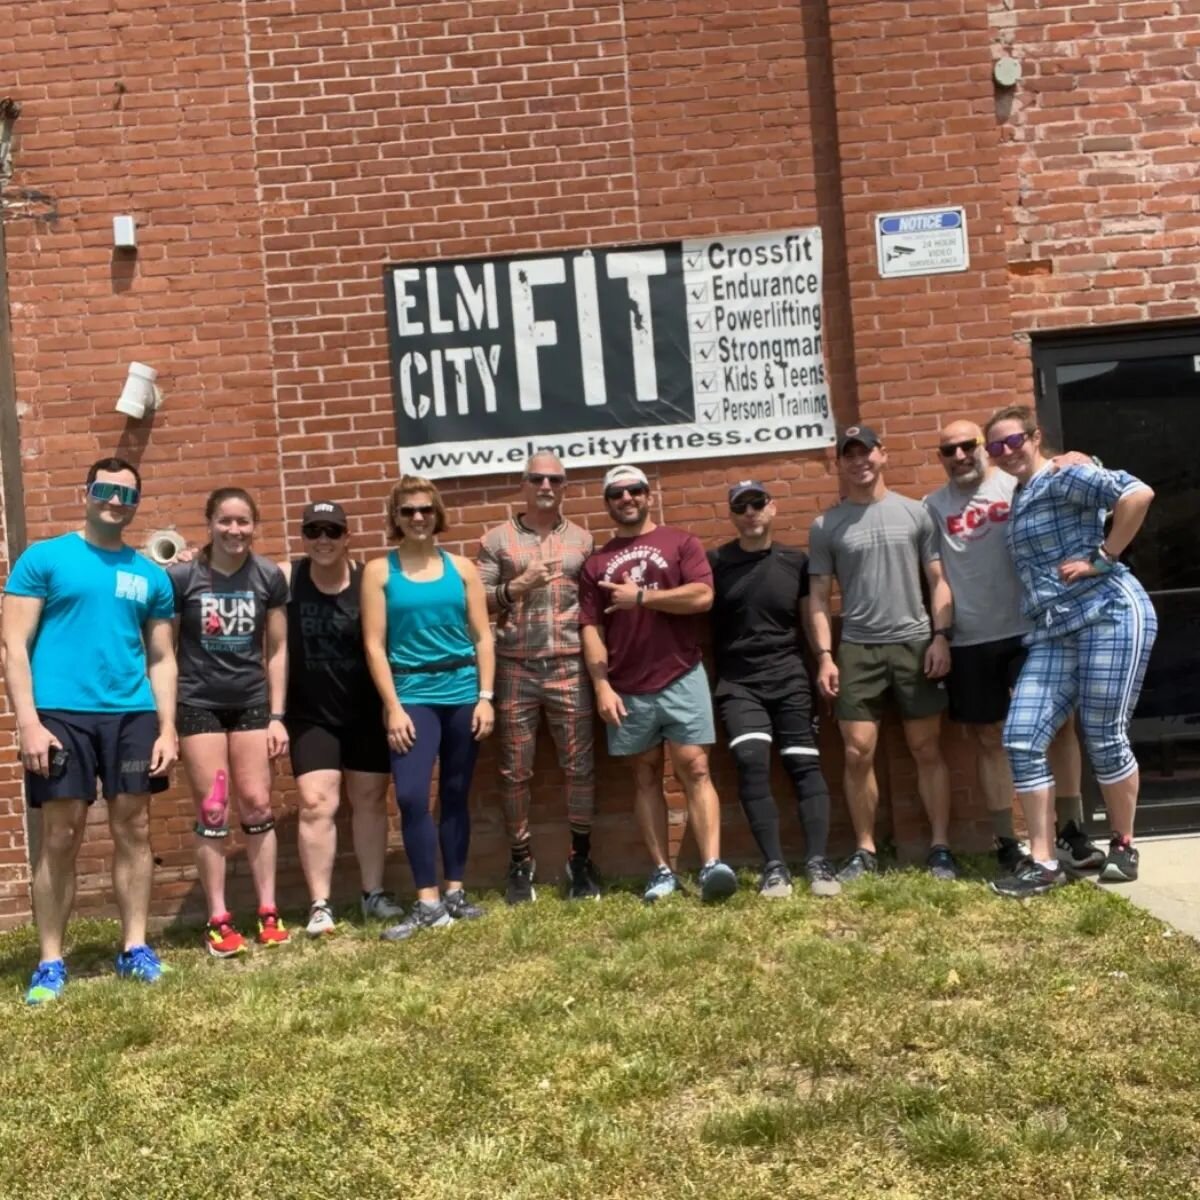 4x4x48 off to a great start! Beautiful weather and the crowd is growing! Come on down and don't forget to get those charity donations in! Link in bio
#elmcityfitness #strengthandconditioning #workoutmotivation #fitnessmotivation #fitnessjourney #life